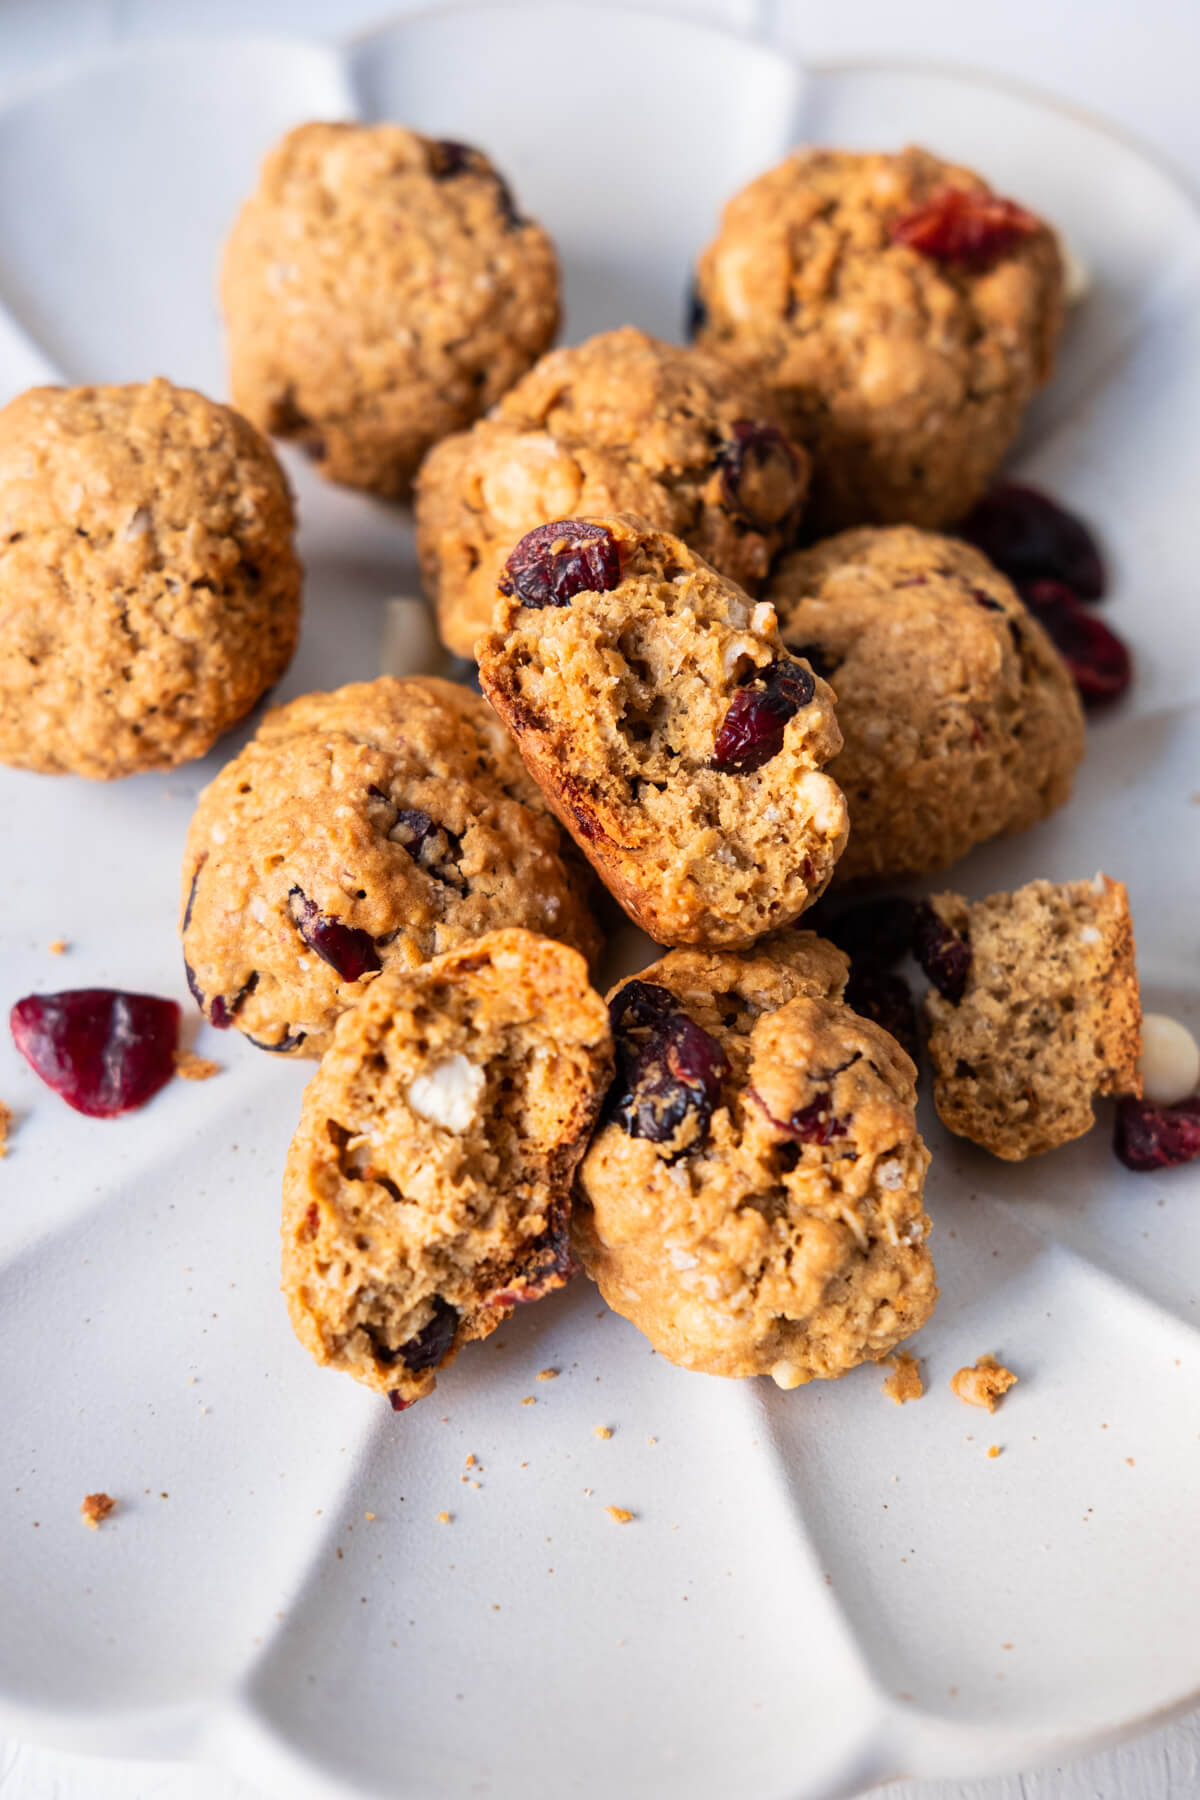 Break apart the oatmeal chocolate cranberry cookies to see chocolate chips and dried cranberries in the center. 